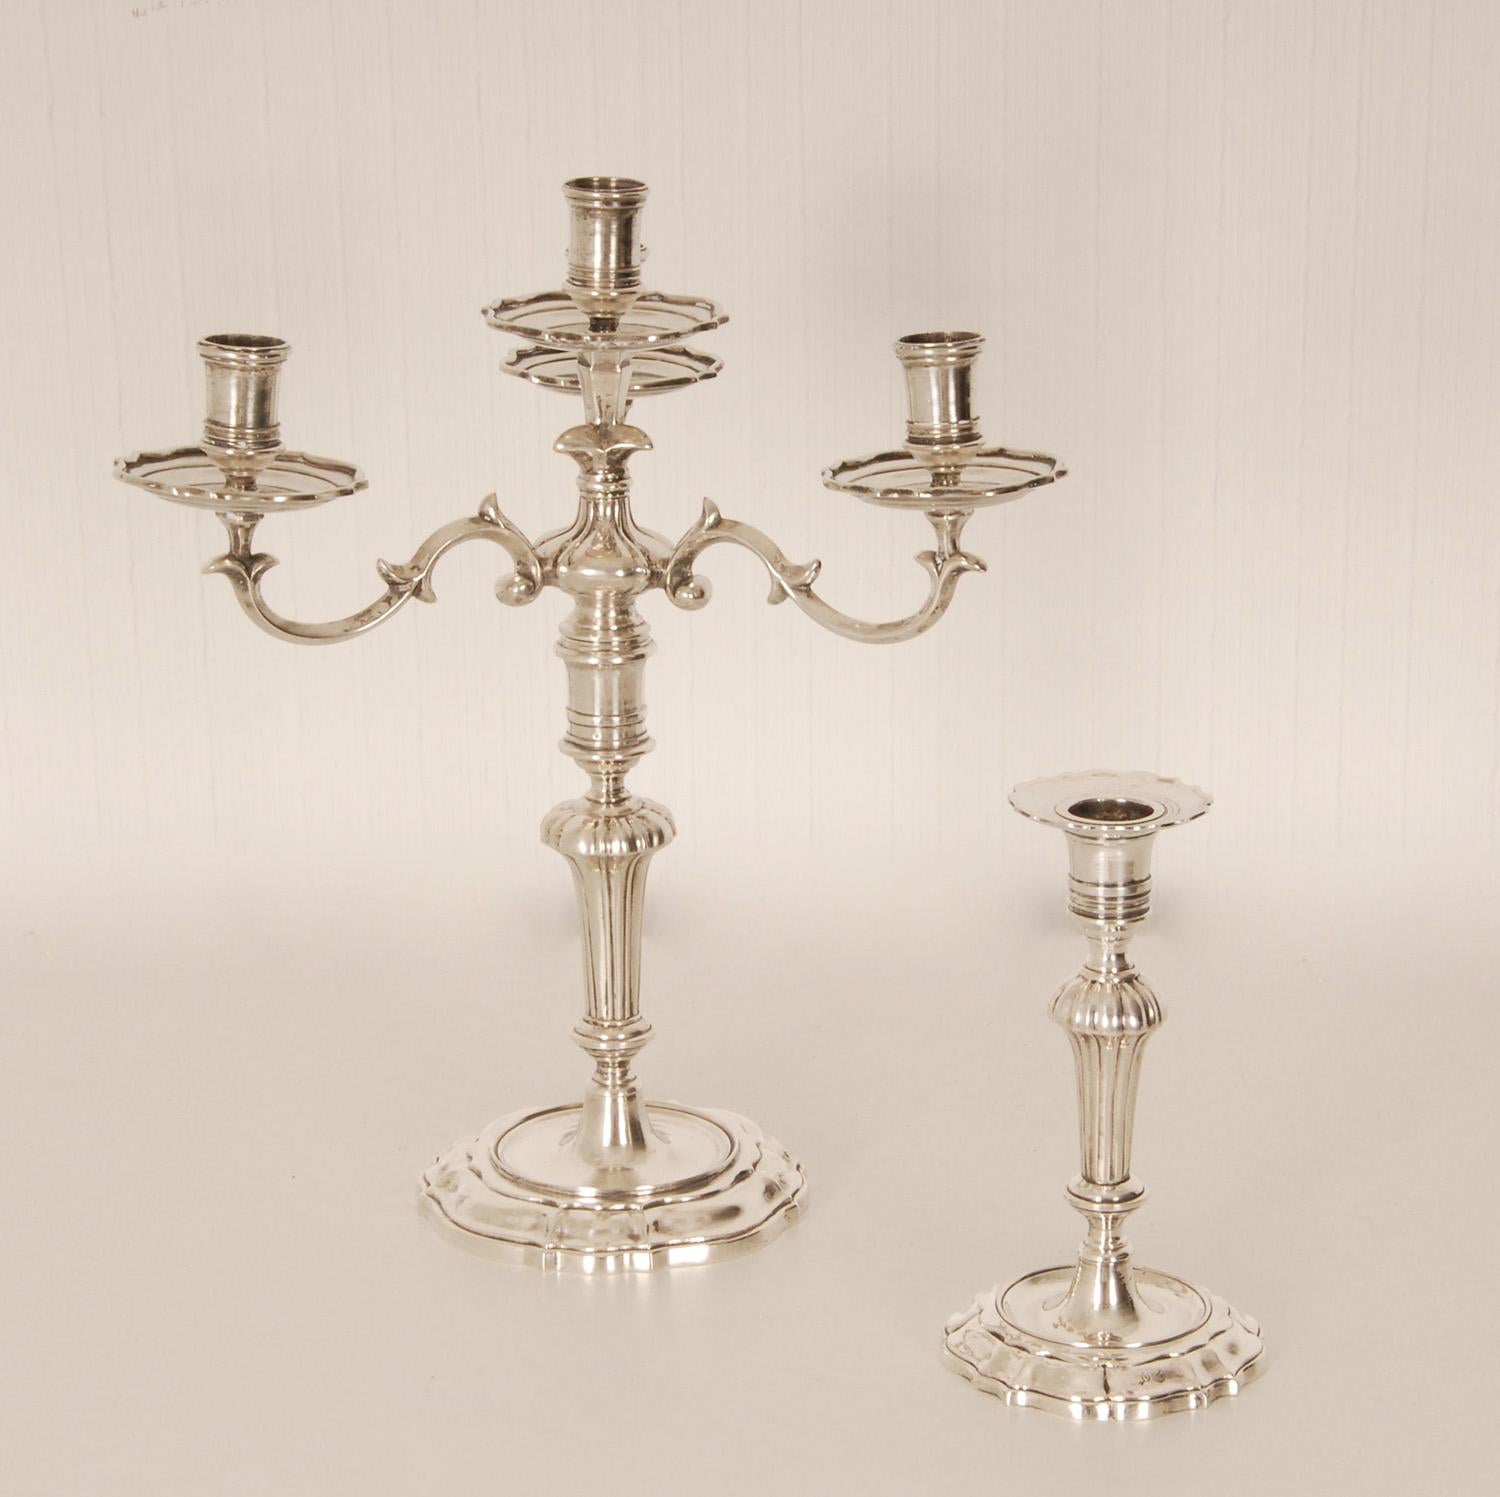 18th Century Italian Candelabra Rococo Sterling Silver Candlesticks Venice pair For Sale 6